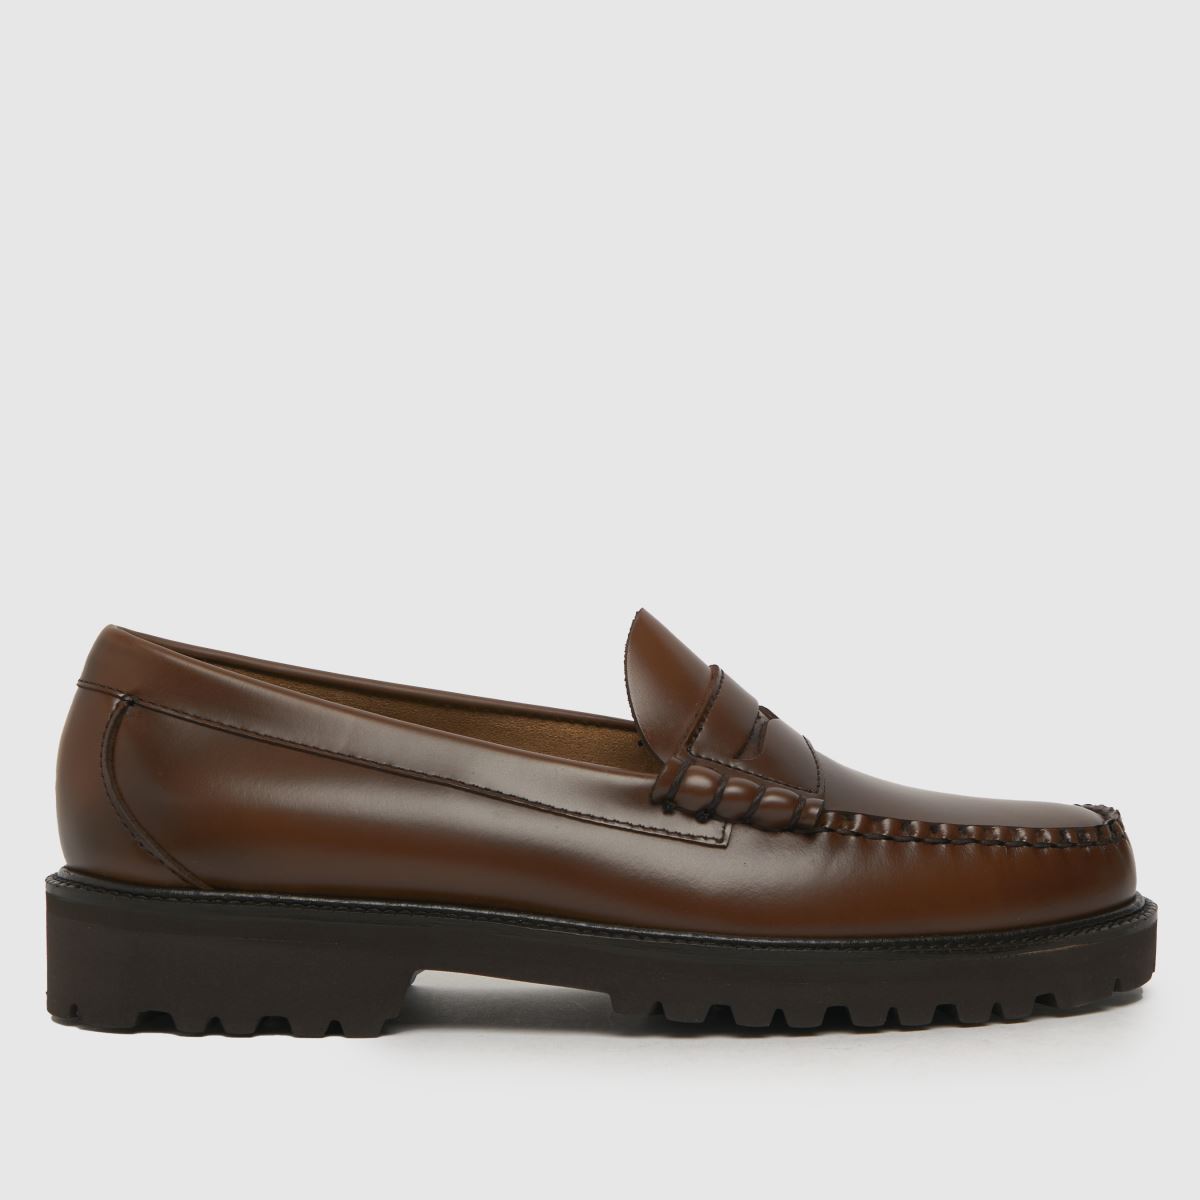 G.H. BASS weejun 90 larson loafer shoes in brown